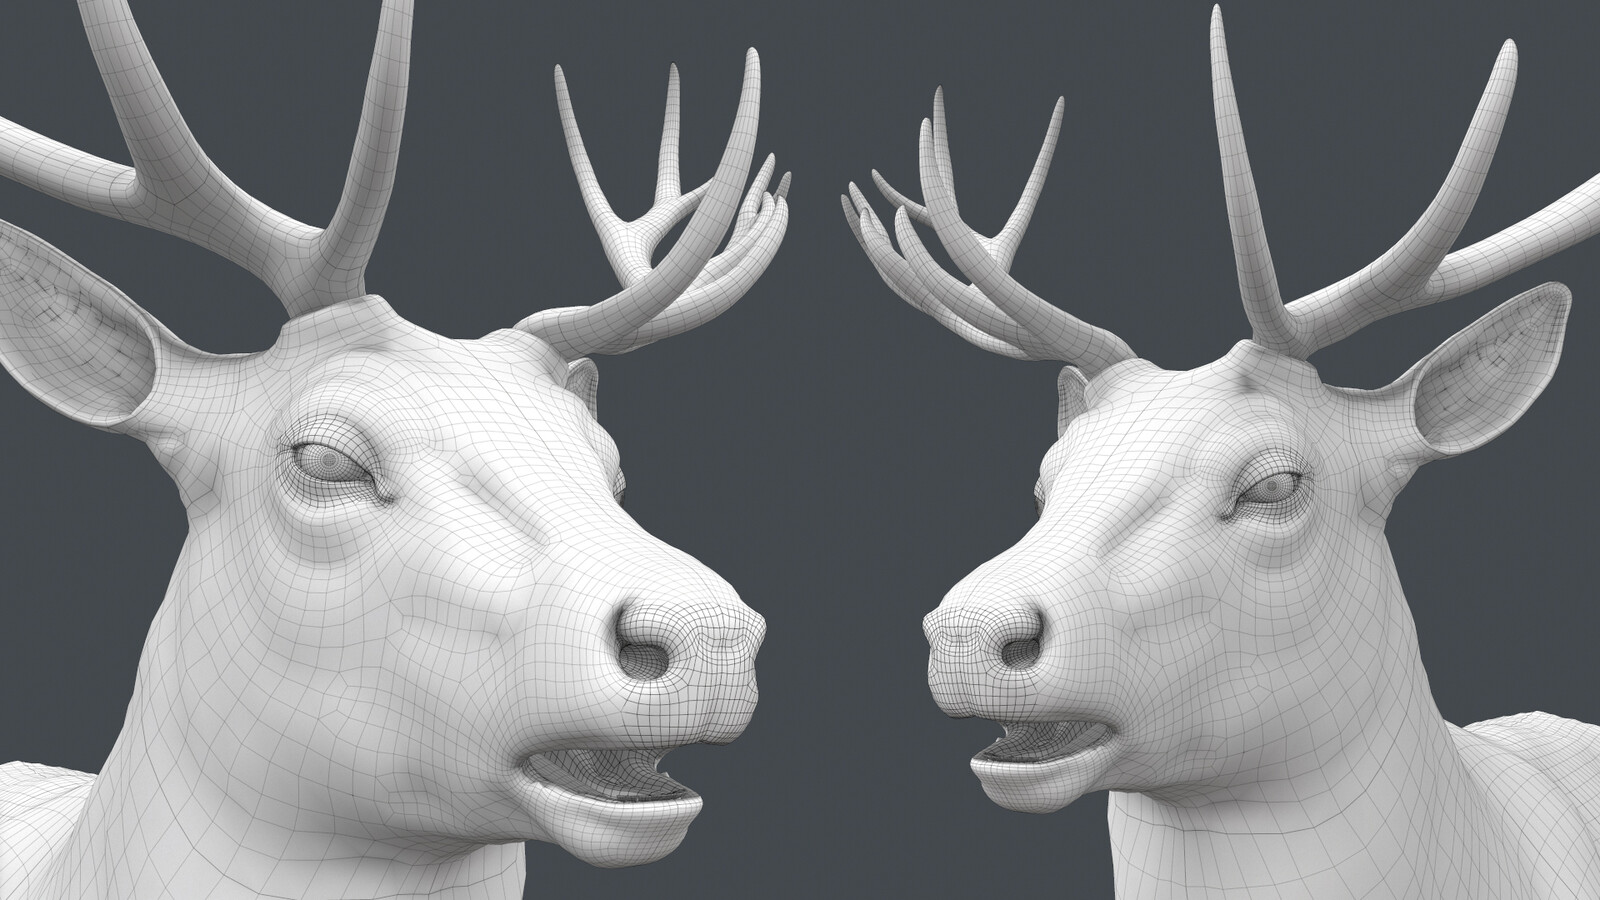 Deer from the film Peter Rabbit (topology).